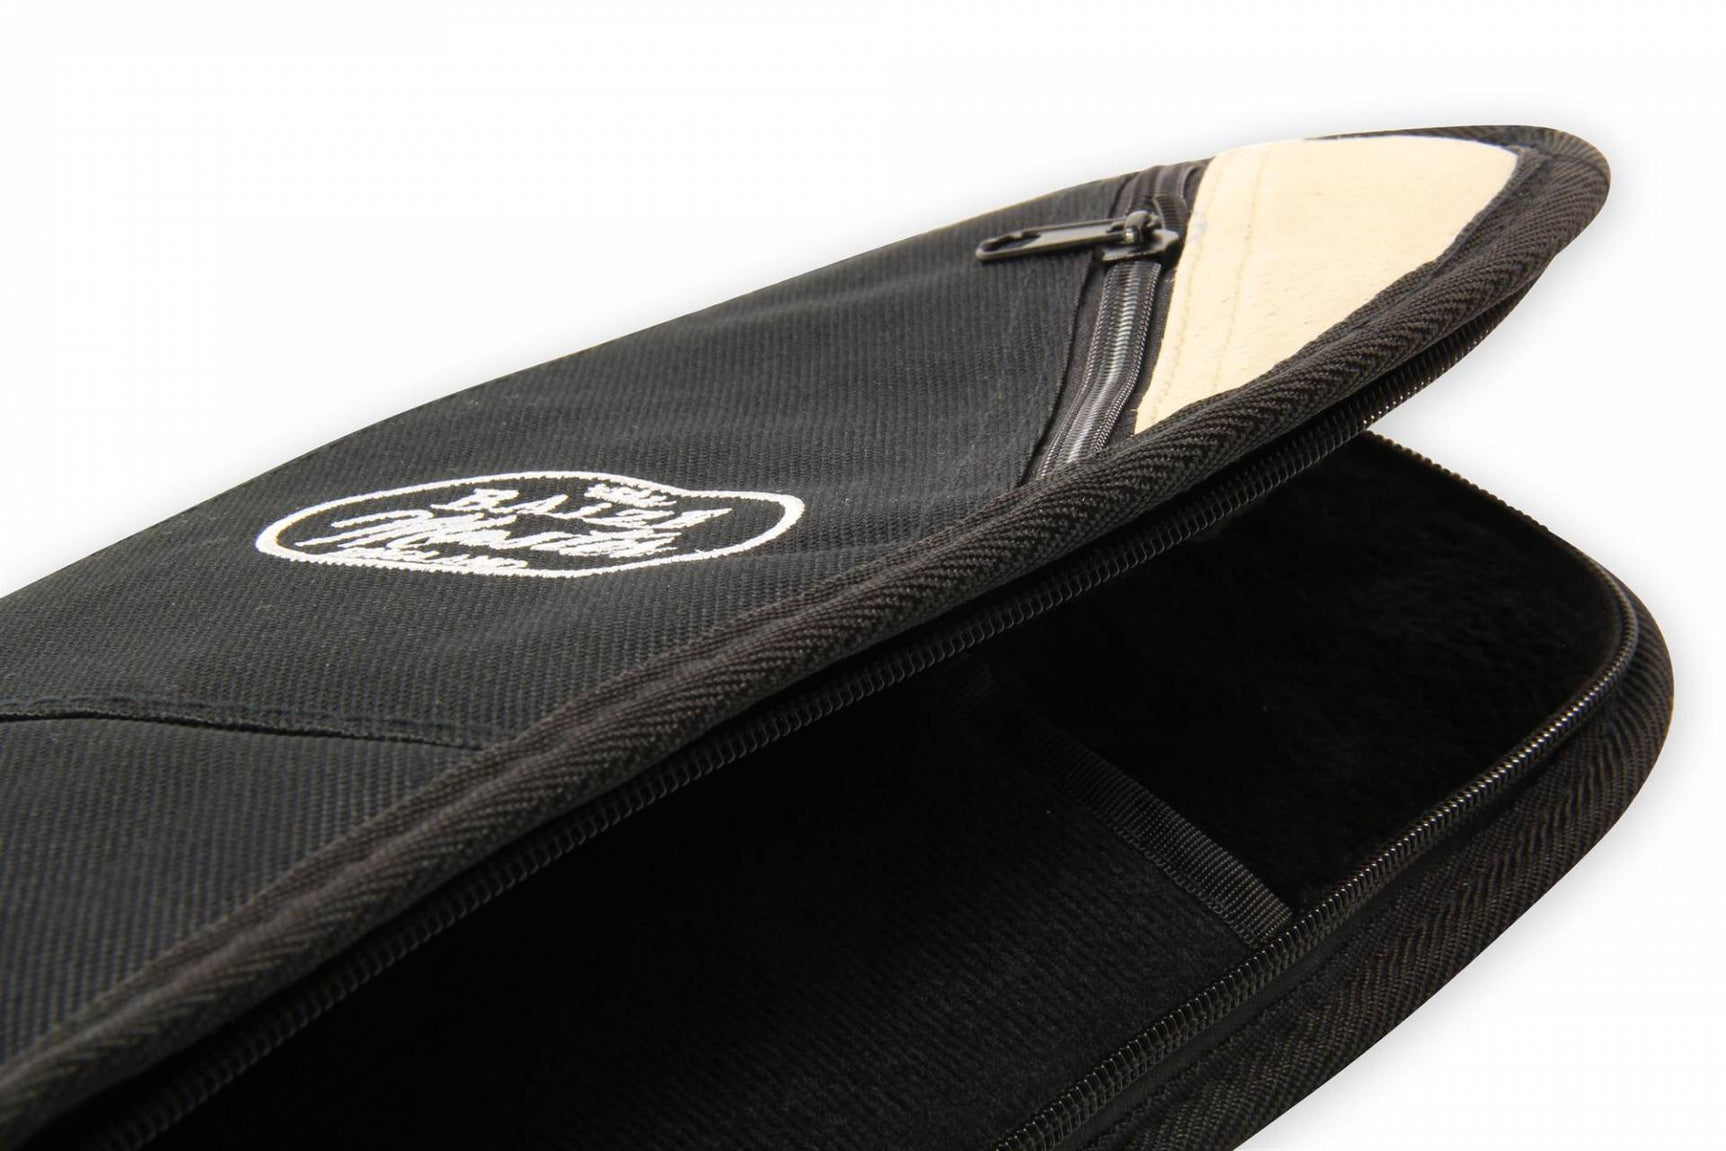 Baize Master Luxury FUR LINED 2 Piece Snooker Pool Cue Case - Holds 1 Butt & 2 Shafts